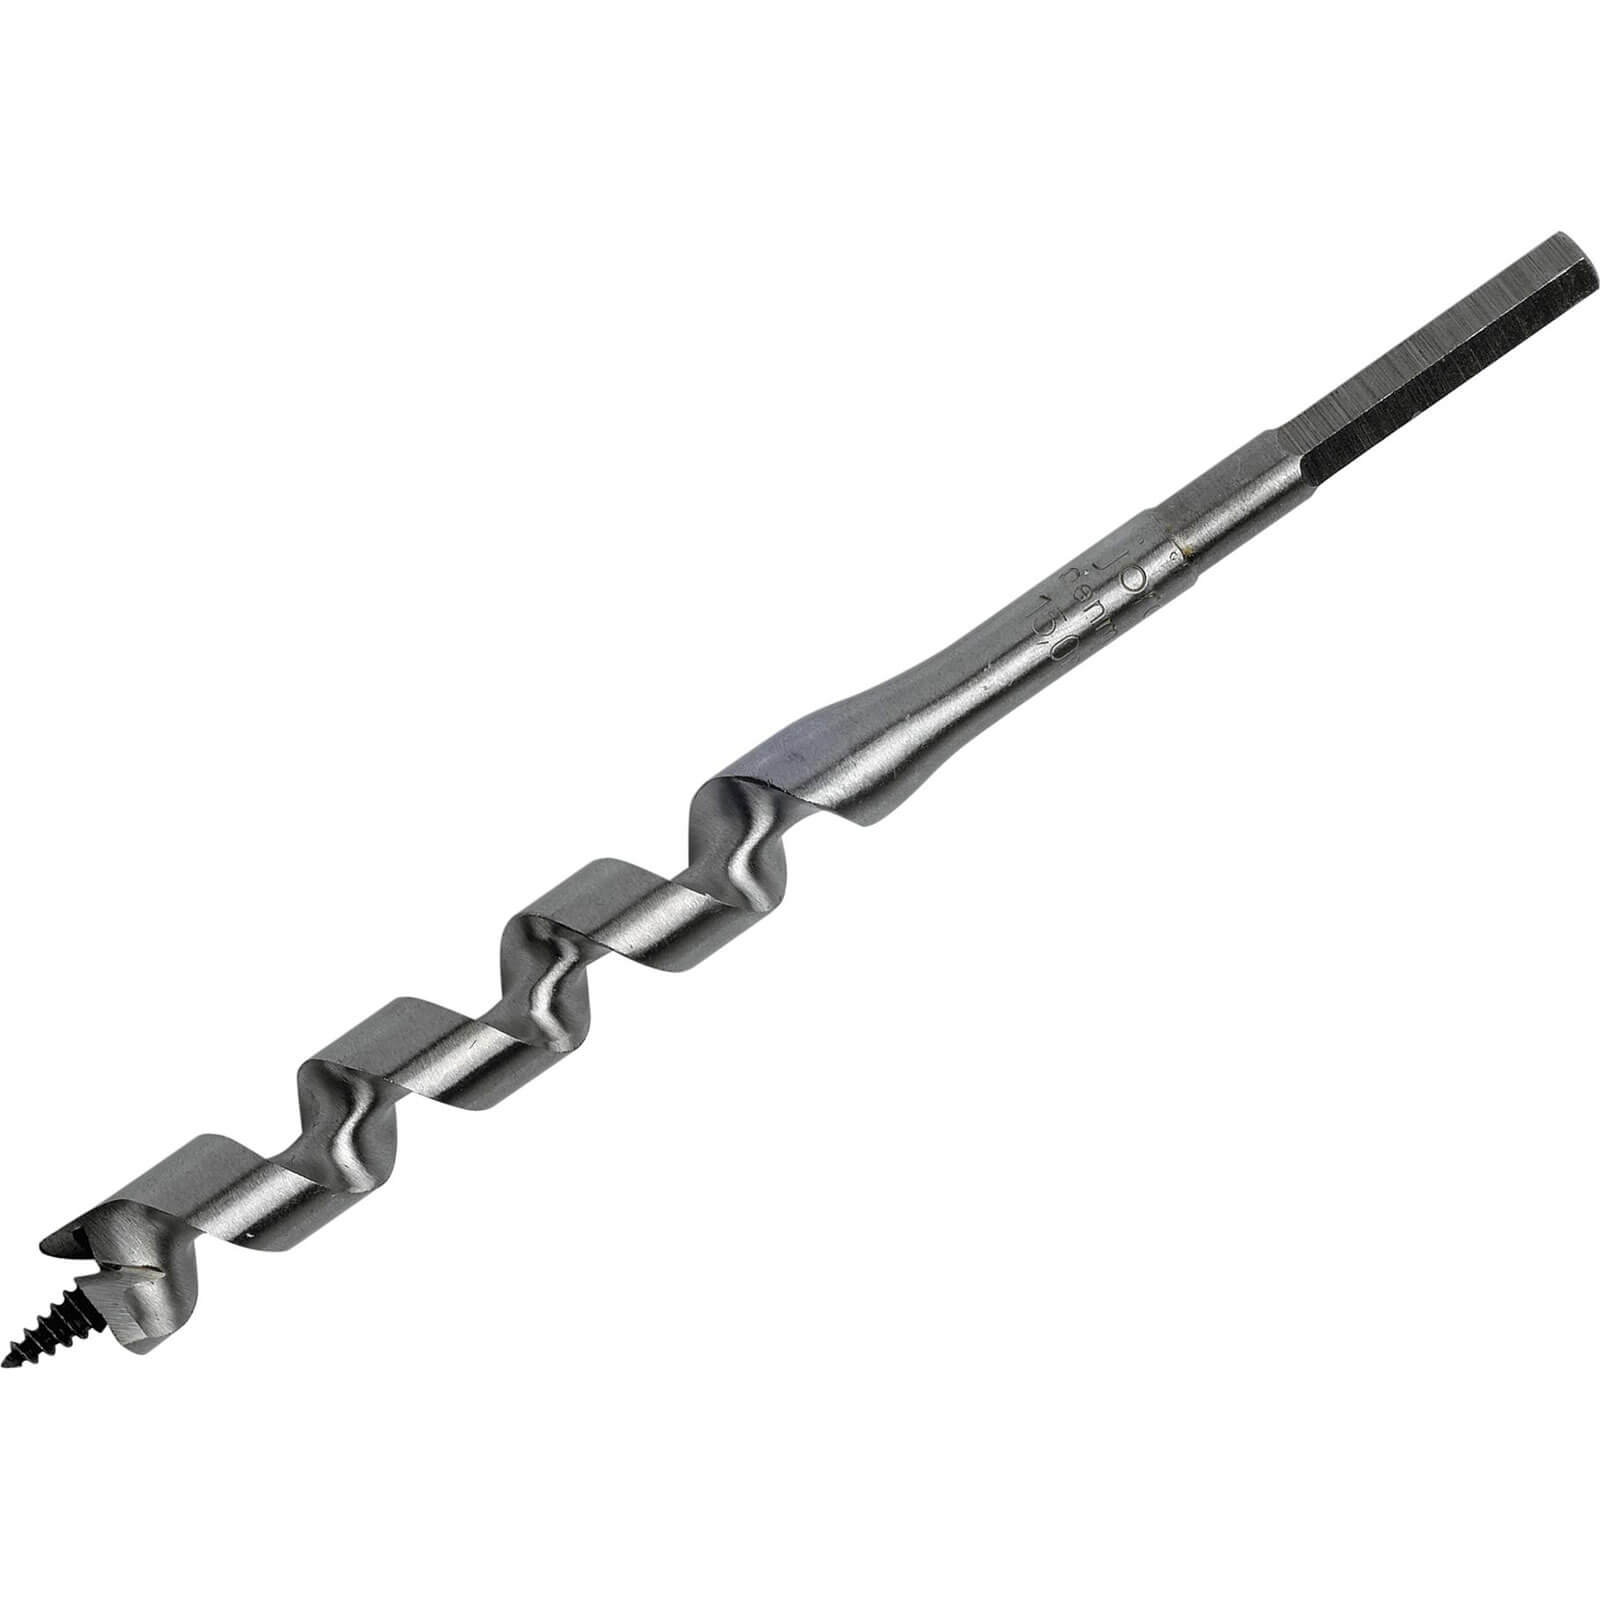 Image of Irwin Wood Auger Drill Bit 12mm 400mm